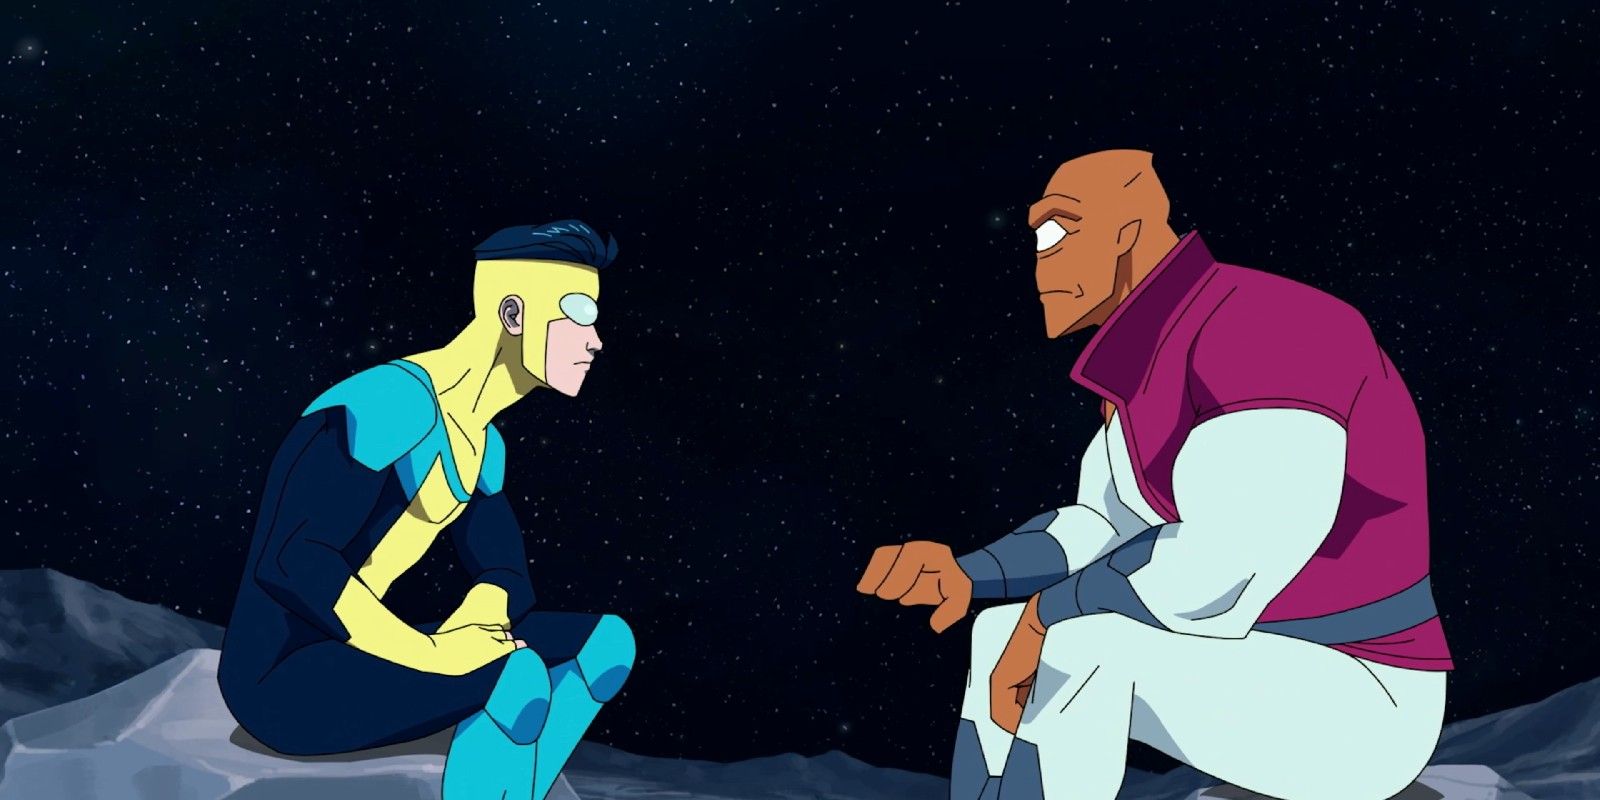 Invincible and Allen the alien talking on the moon